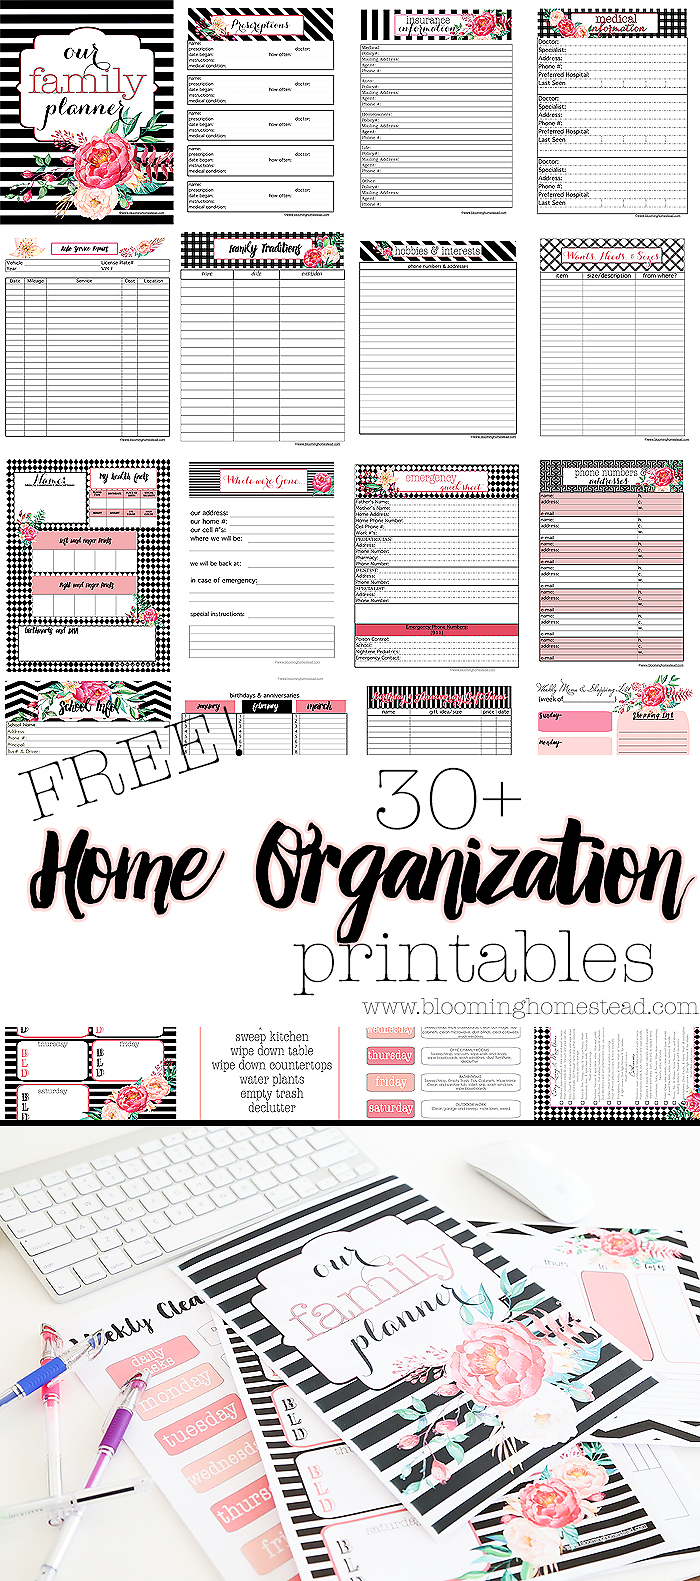 Beautiful floral home organizational printables you can download for free! 30+ printables to keep your home and life organized. Plus they are so pretty!